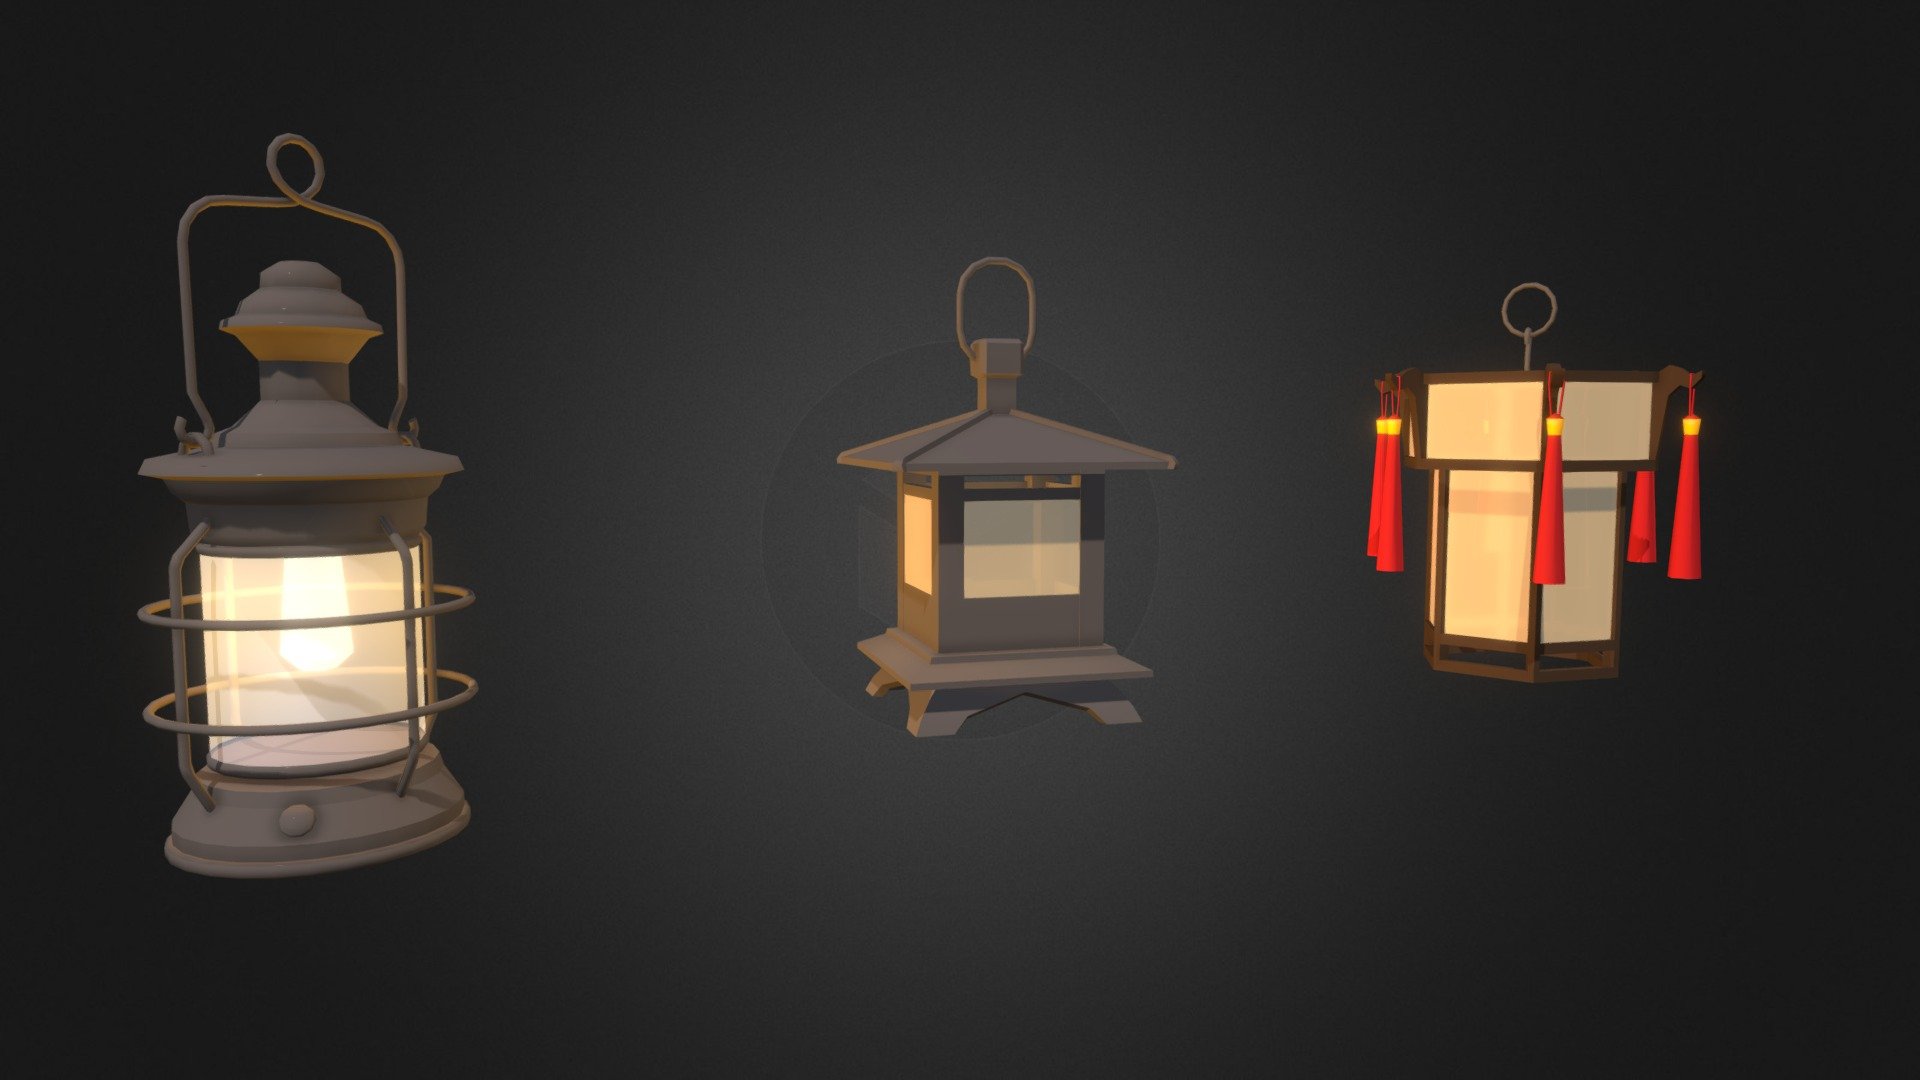 European, Chinese and Japanese versions of lantern.
Lowpoly practice 3d model